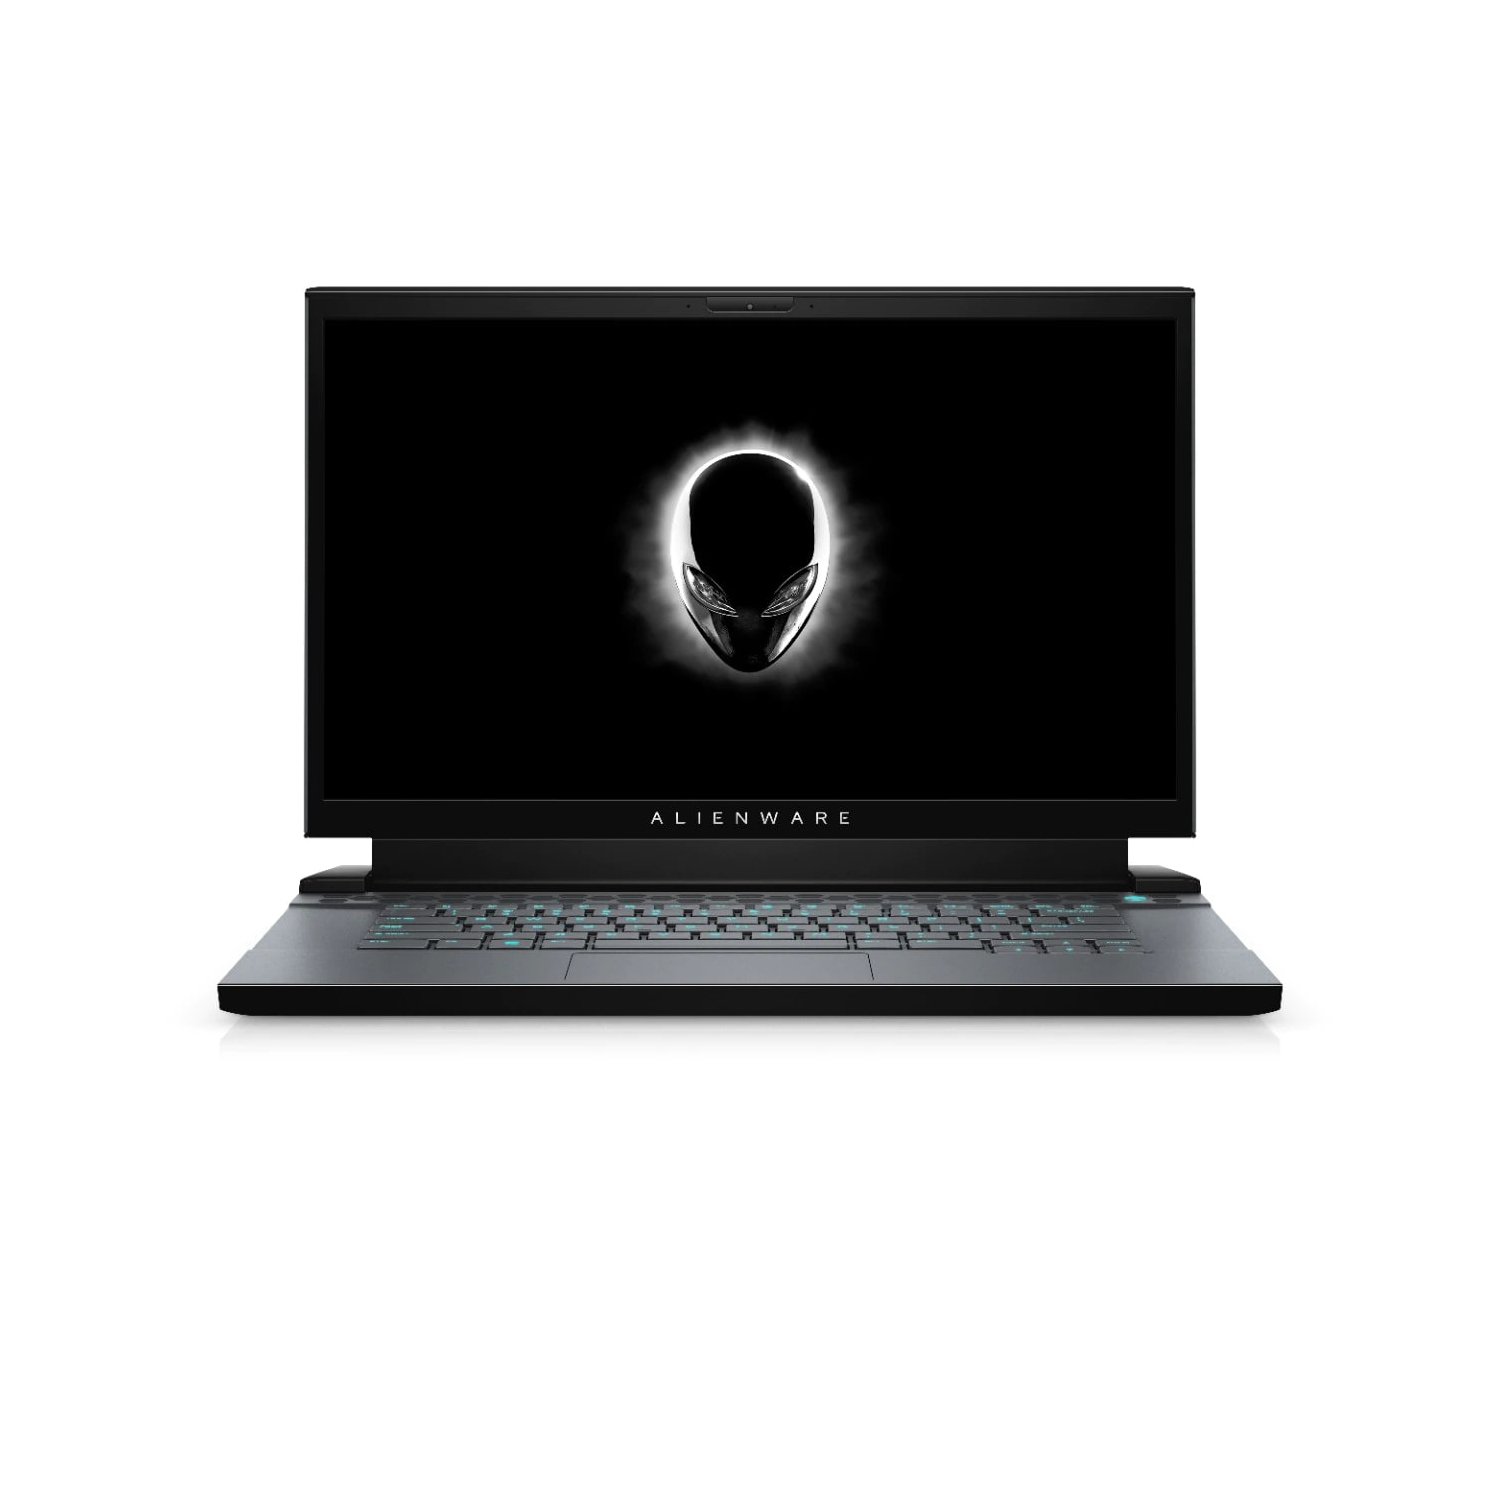 Refurbished (Excellent) - Dell Alienware m15 R2 Gaming Laptop (2019) | 15.6" FHD | Core i7 - 2TB SSD - 16GB RAM - RTX 2080 | 6 Cores @ 4.5 GHz Certified Refurbished